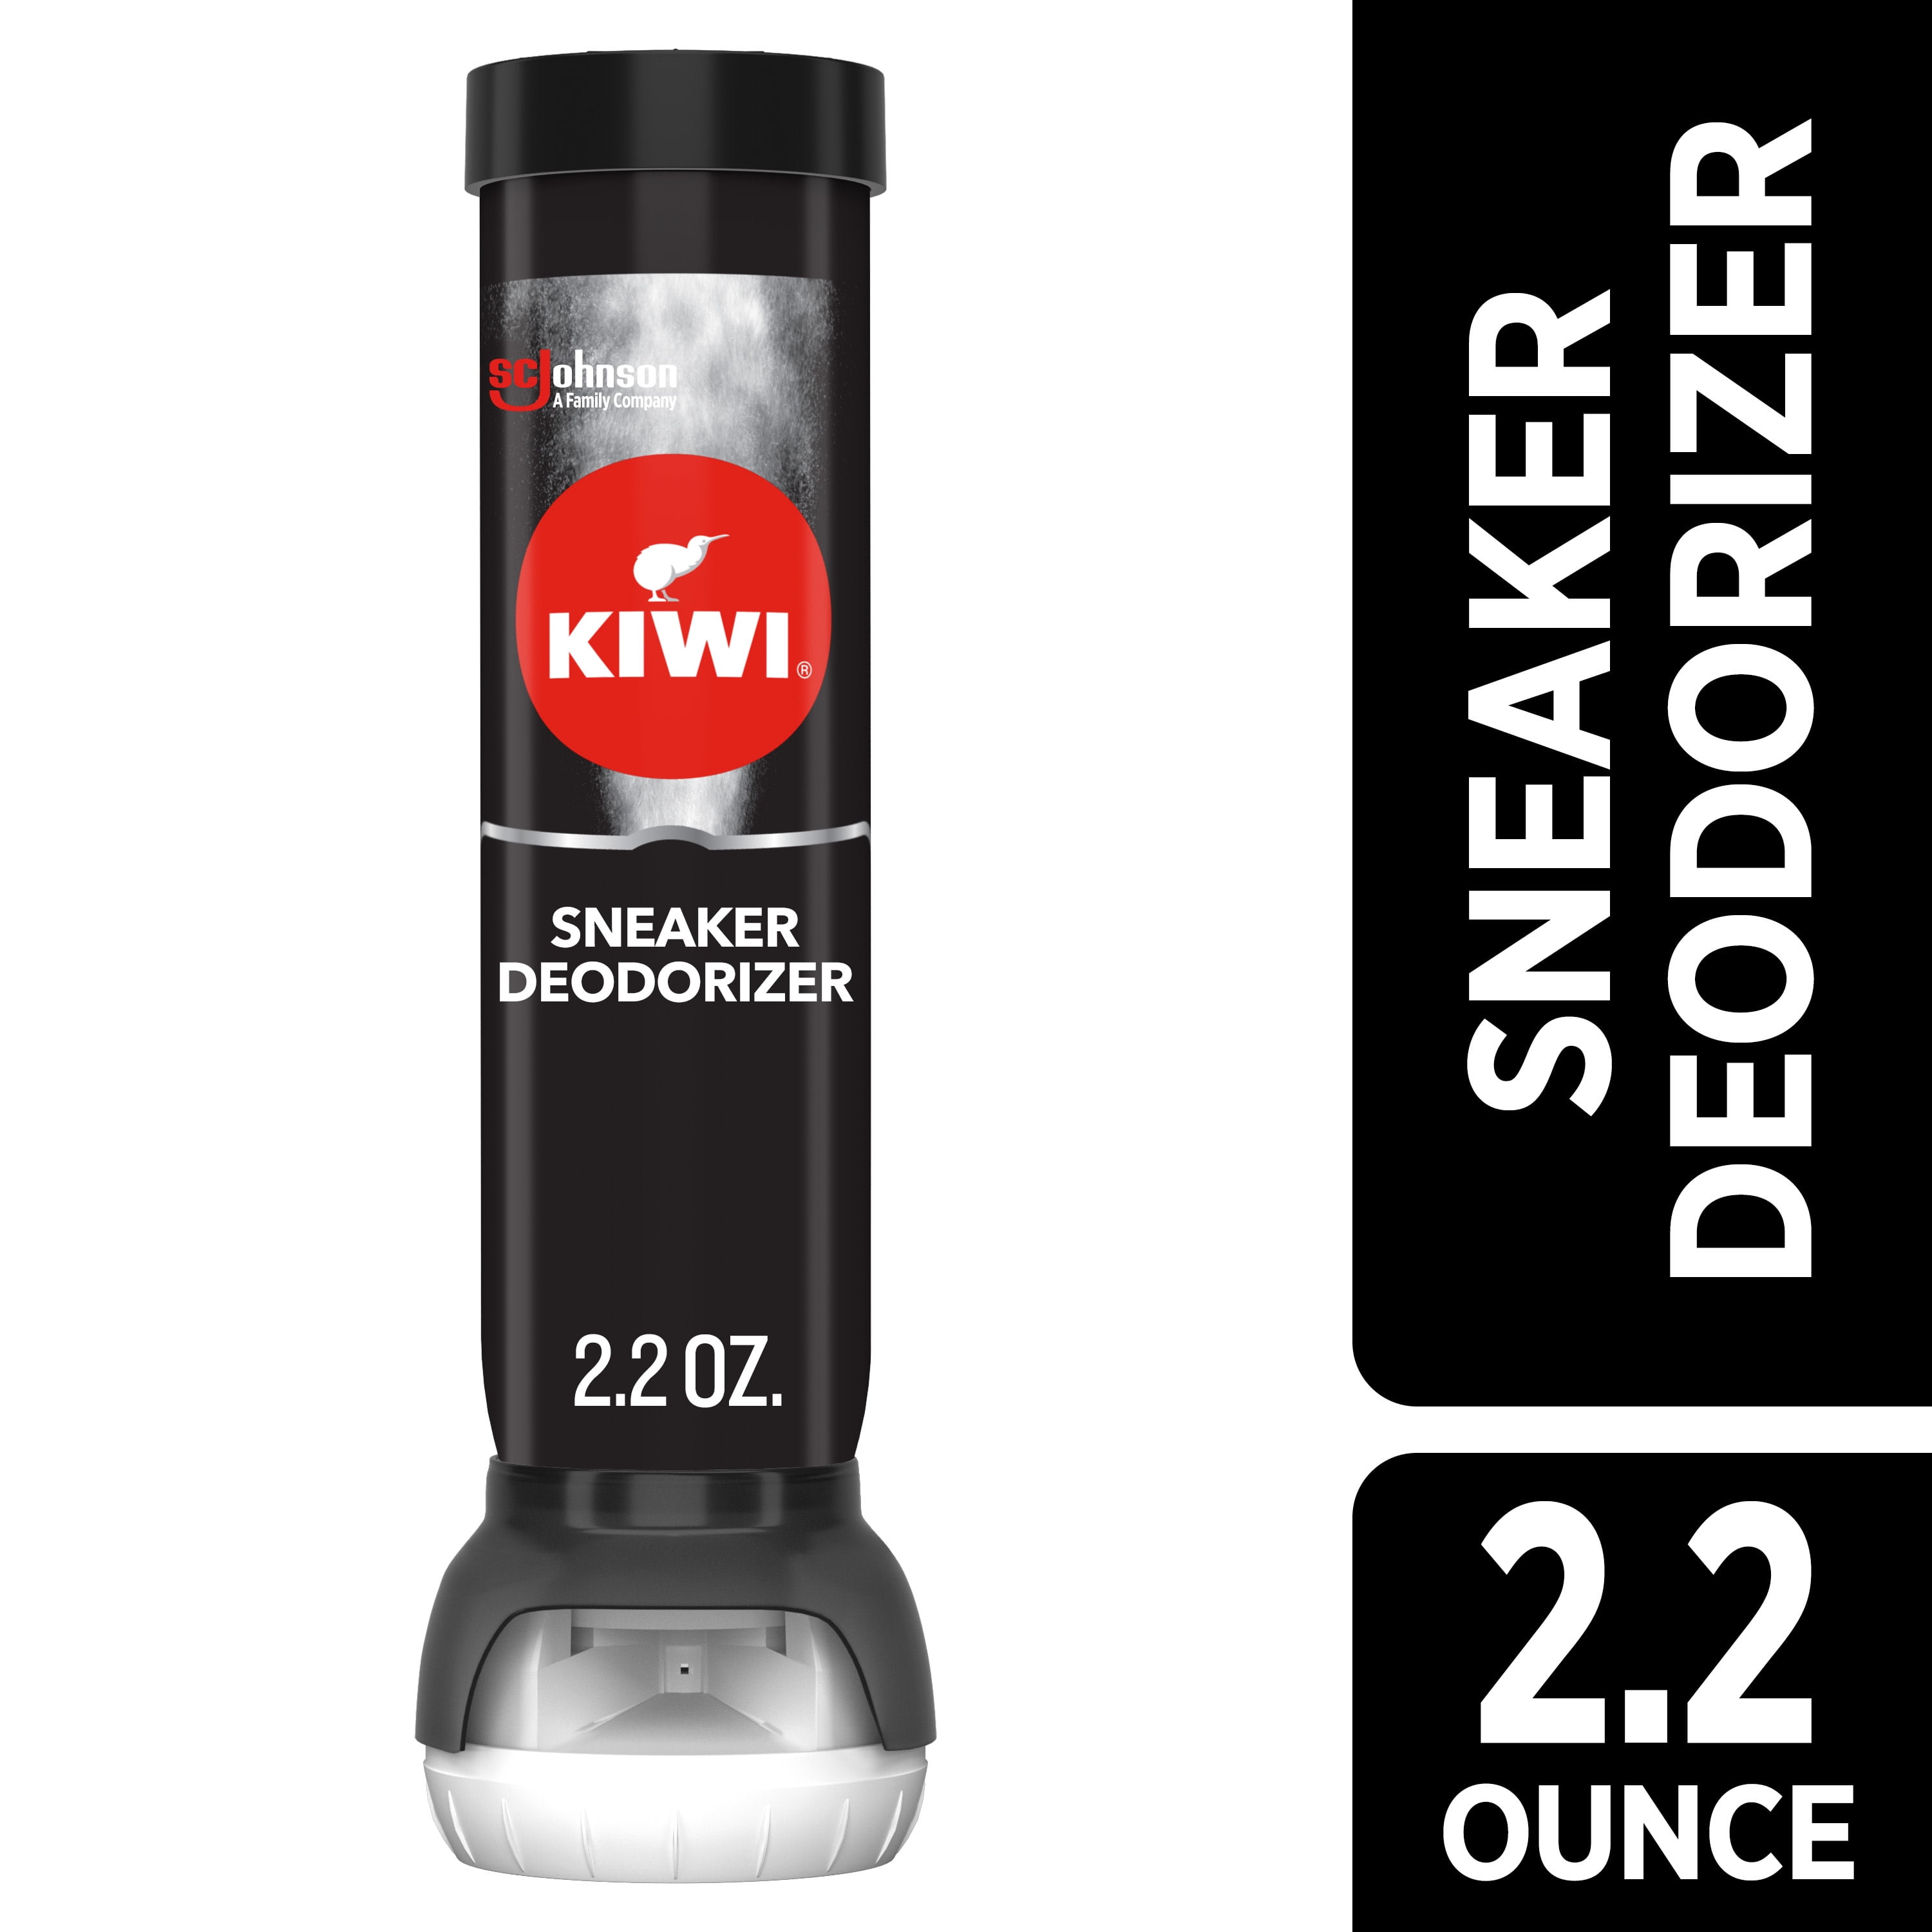 KIWI Sneaker Deodorizer Shoe Spray oz - Controls all day. For all shoe types. Step 3 of the 3-Step Sneaker Care system (1 Aerosol Spray Can) - Walmart.com